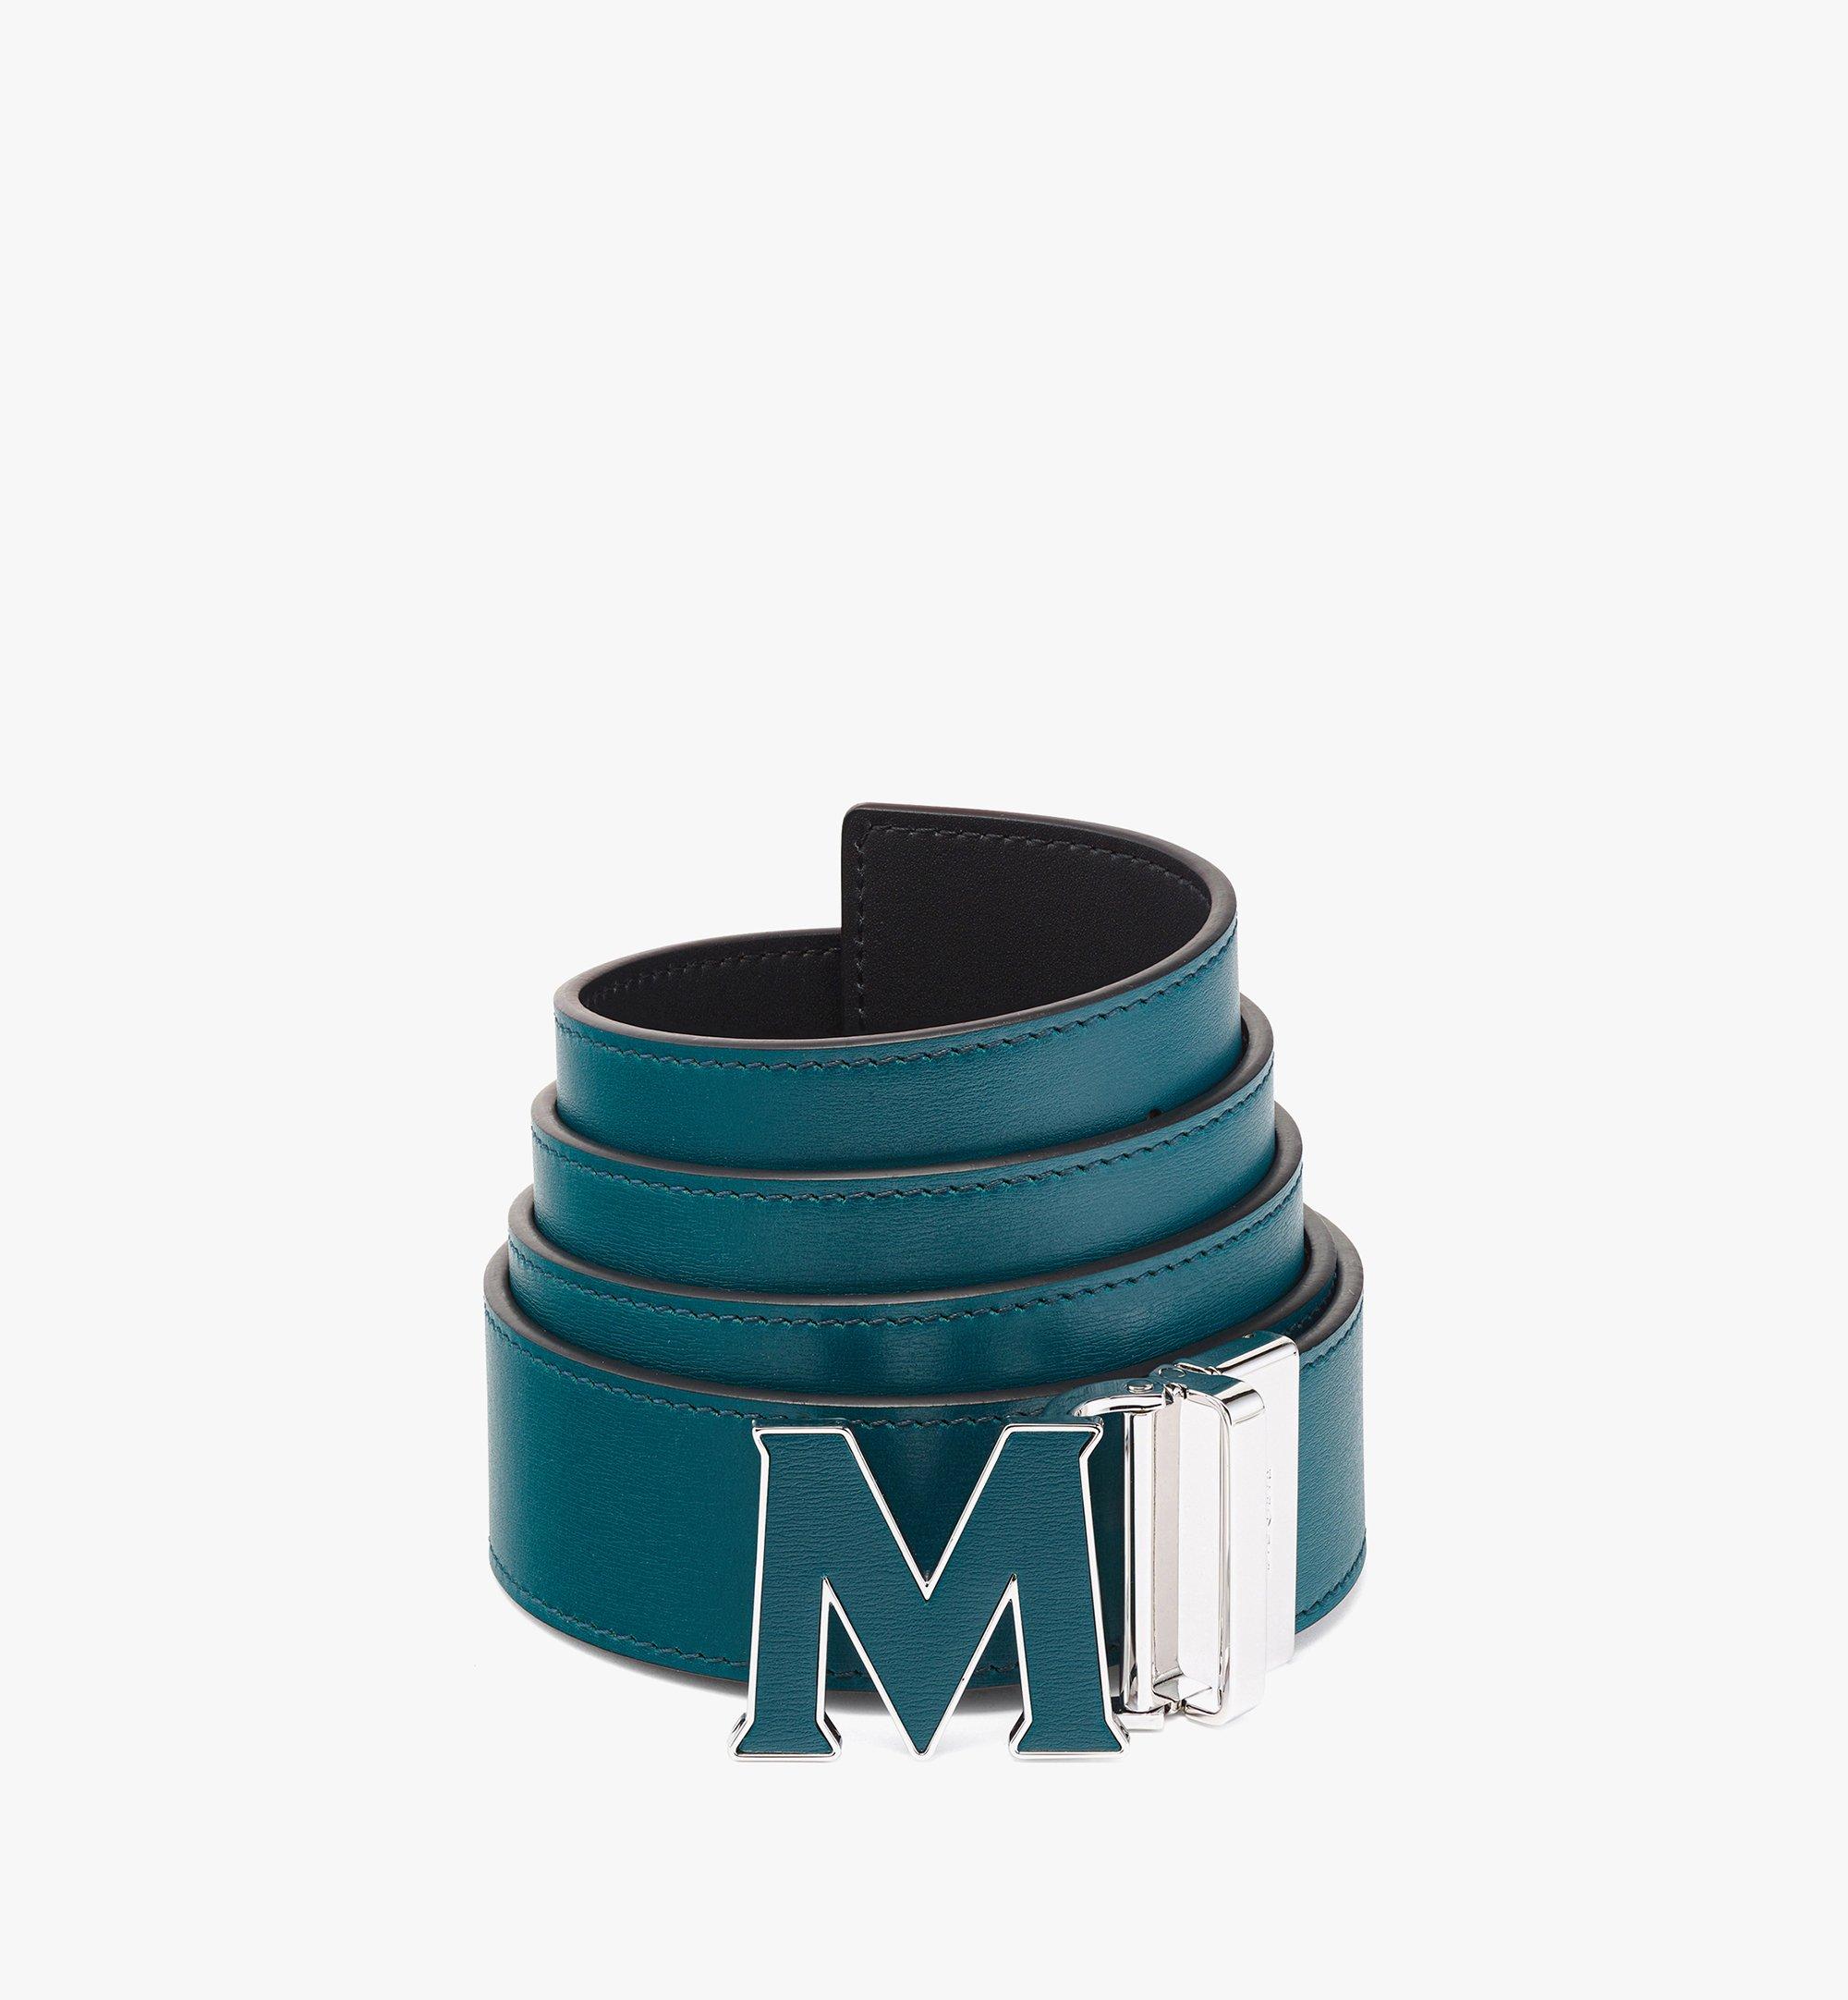 MCM Claus Leather Inlay M Reversible Belt 1.5” in Embossed Leather Green MXBCSVI06JY001 Alternate View 1